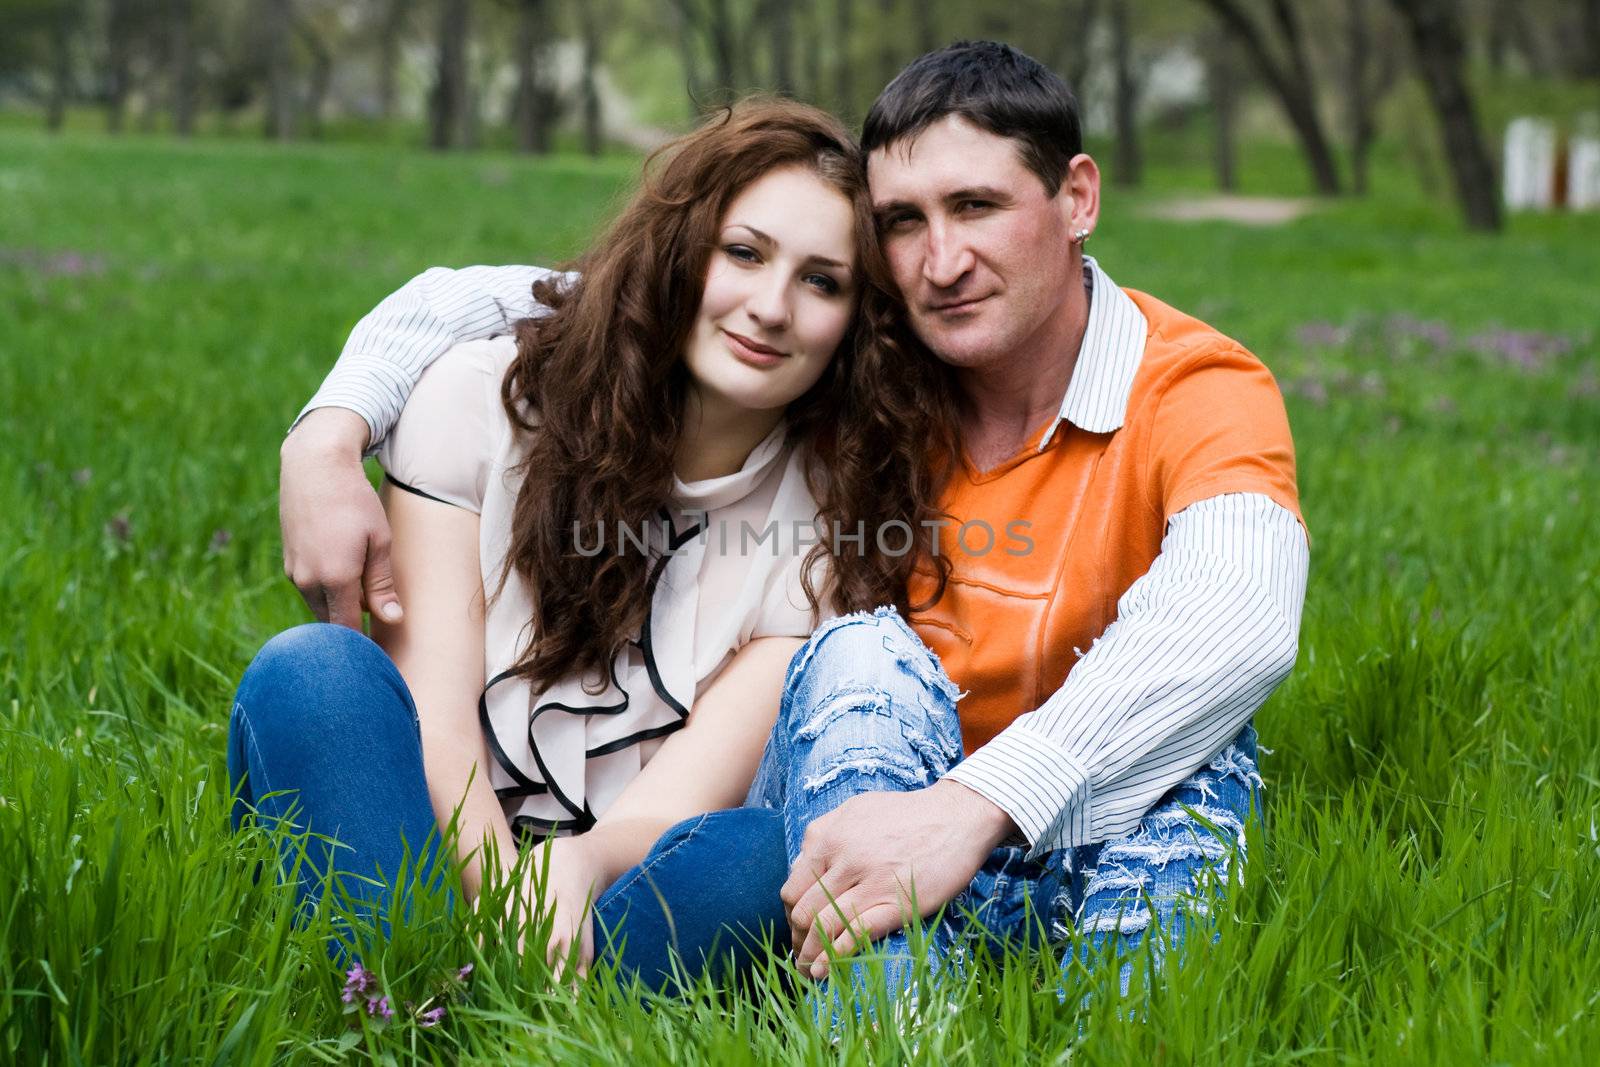 Man and woman embracing sitting on the grass